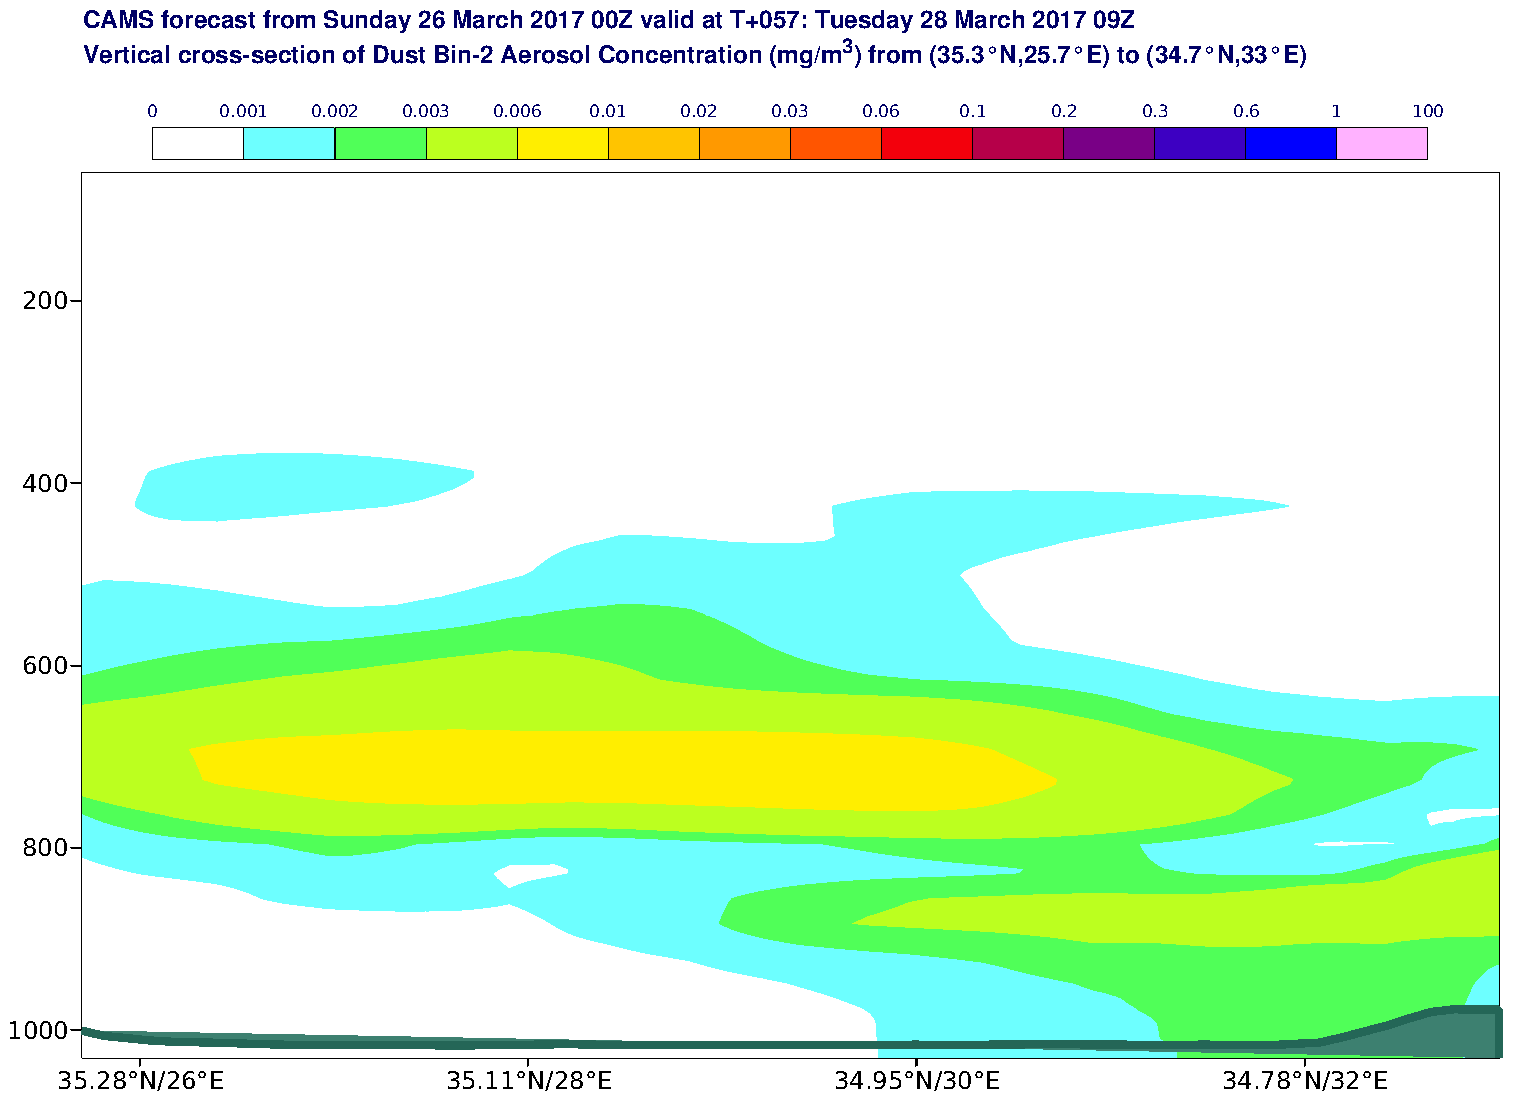 Vertical cross-section of Dust Bin-2 Aerosol Concentration (mg/m3) valid at T57 - 2017-03-28 09:00